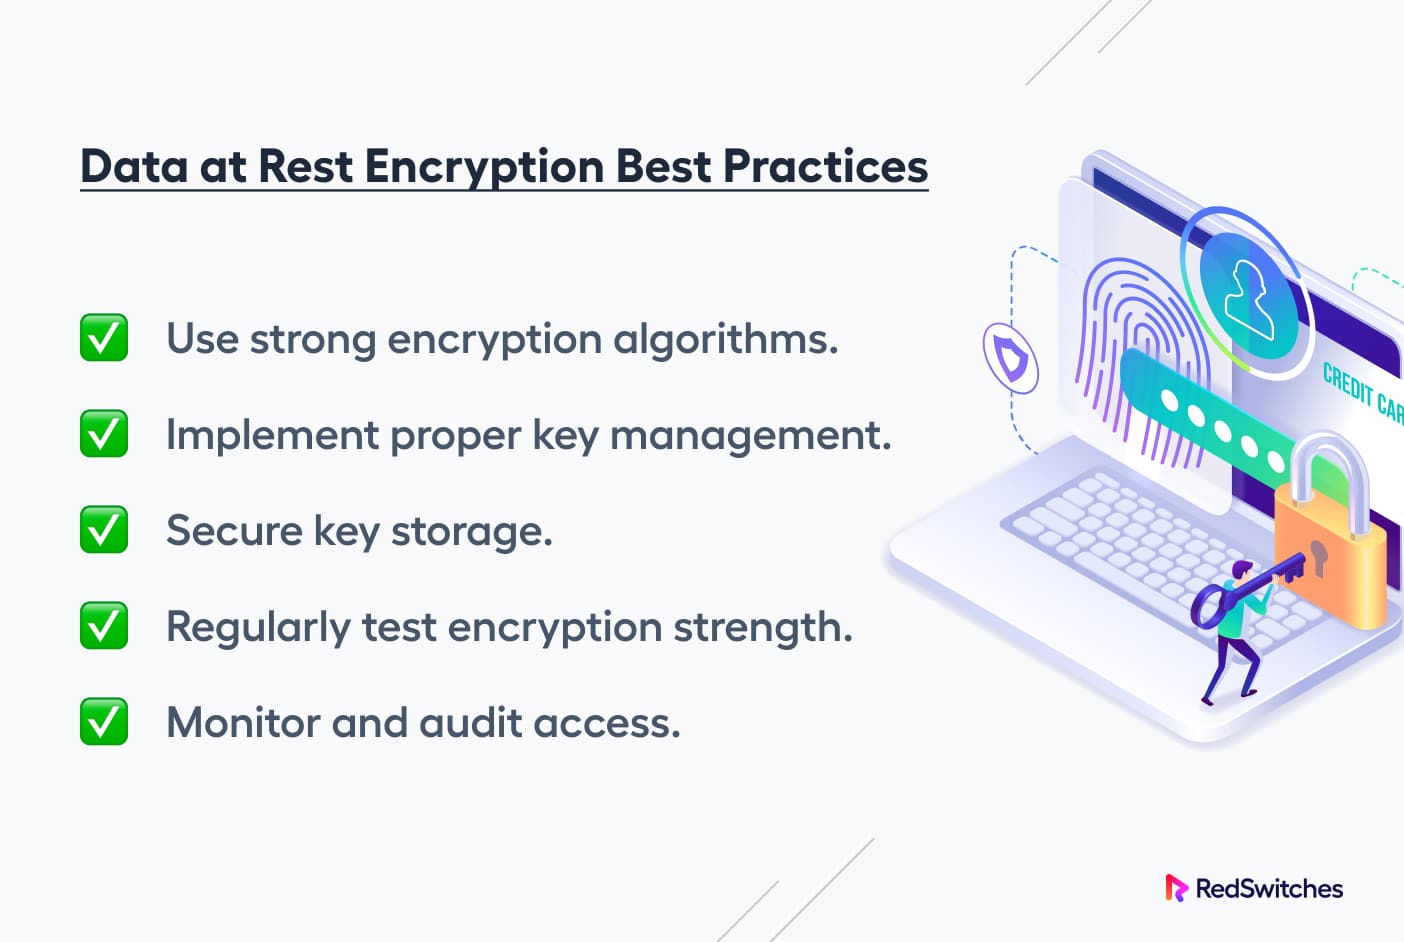 Data at Rest Encryption Best Practices